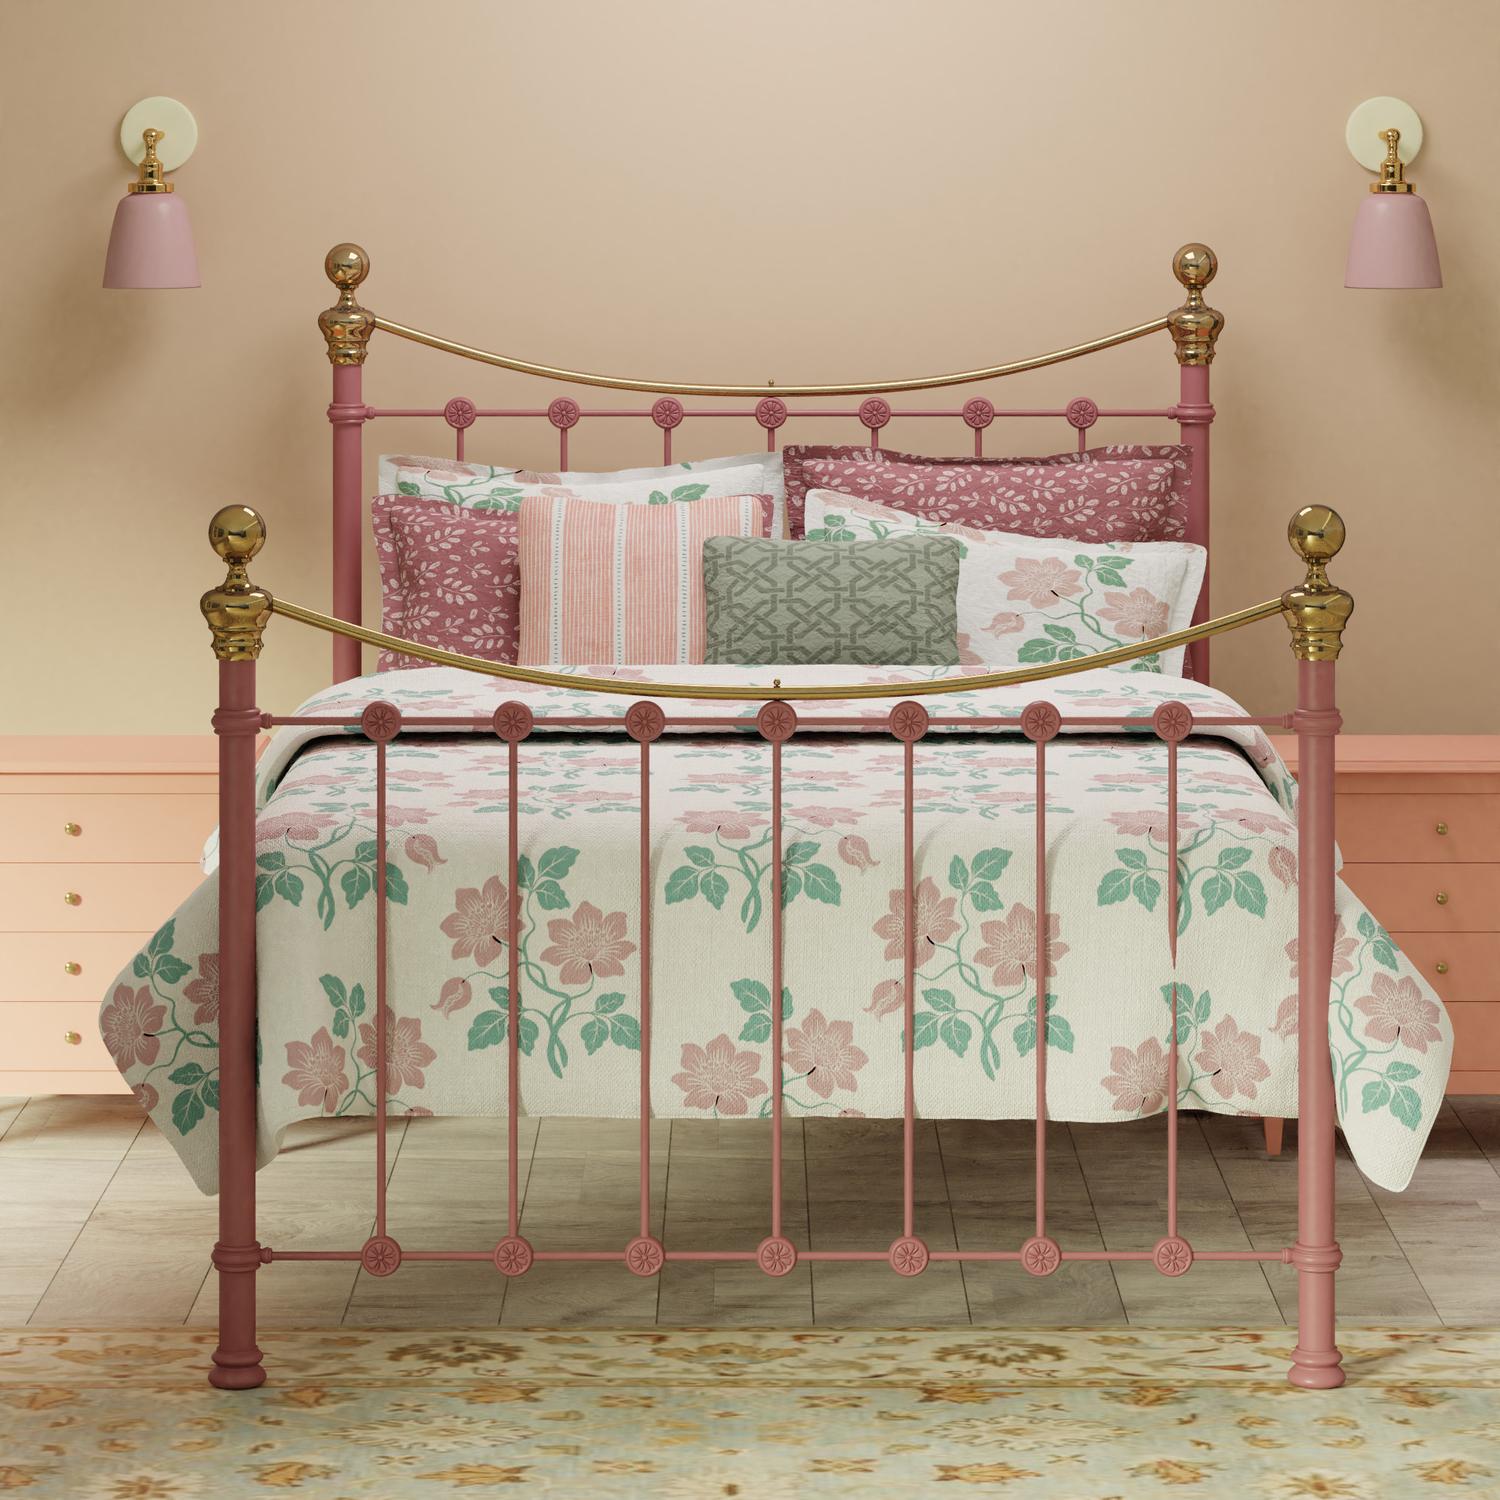 Selkirk iron bed - Pink and yellow bedroom